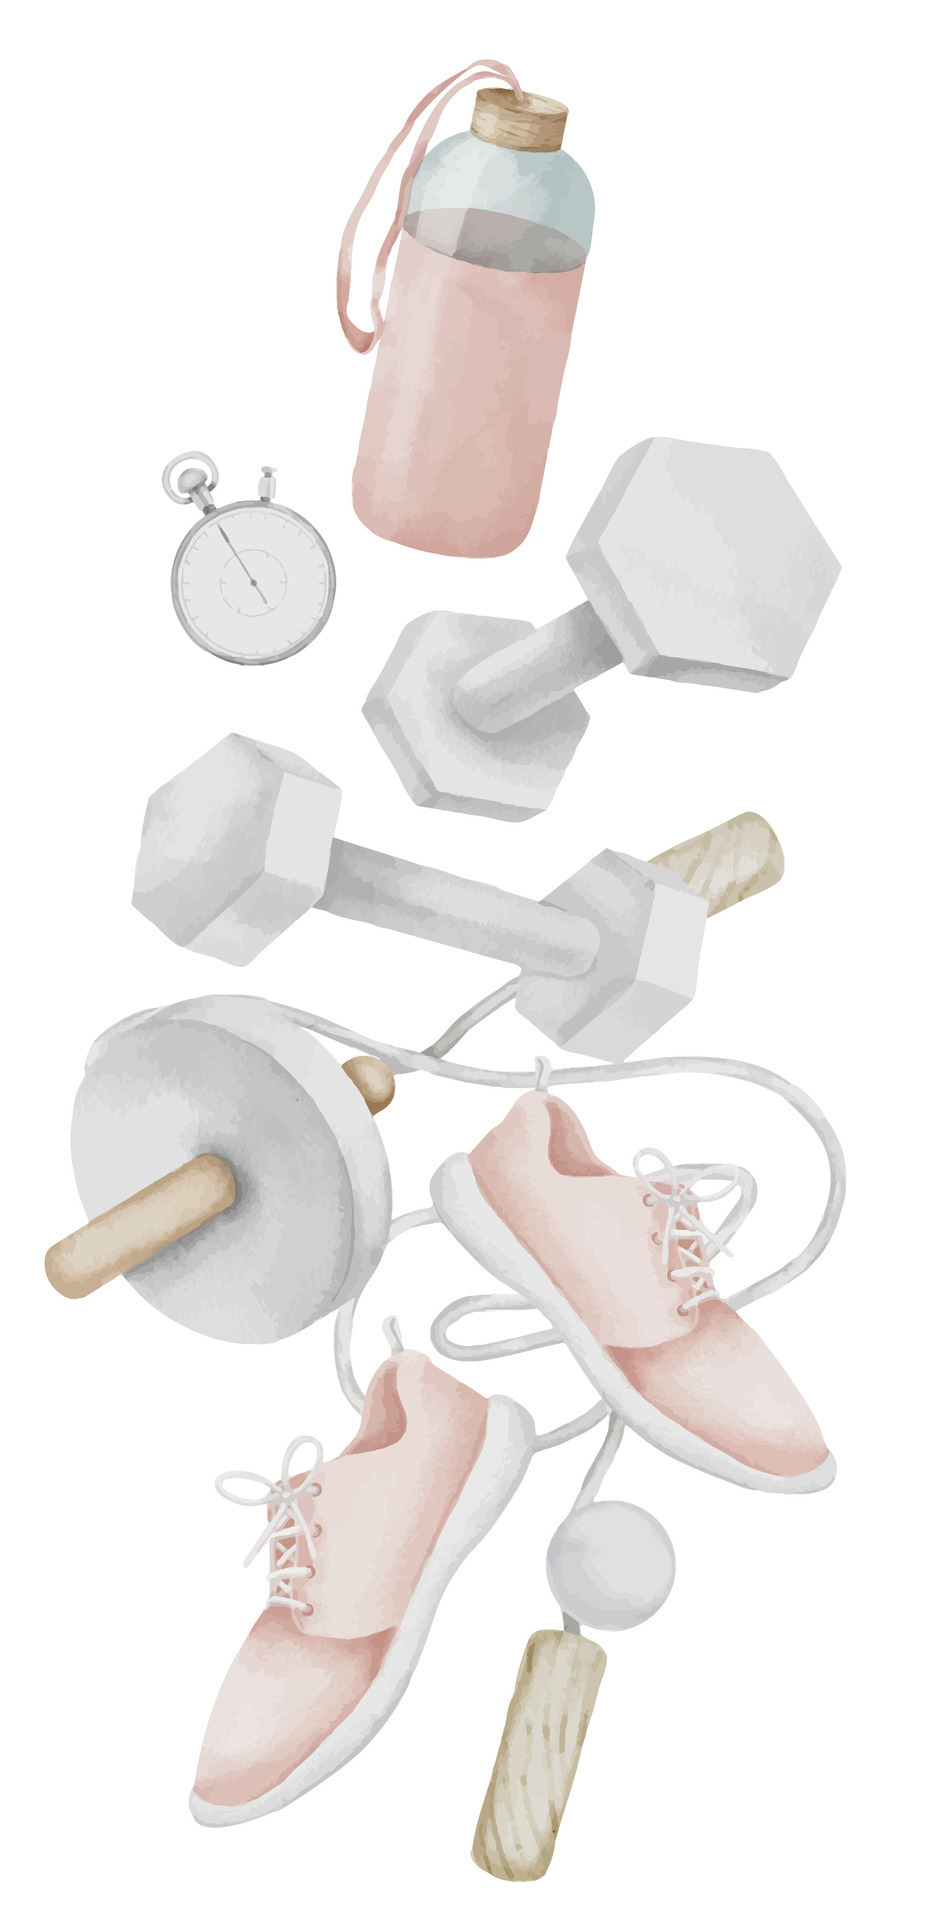 https://static.vecteezy.com/system/resources/previews/029/088/069/original/sports-exercise-equipment-on-white-isolated-background-hand-drawn-watercolor-female-fitness-accessories-illustration-vertical-composition-of-training-items-for-women-drawing-of-gym-workout-tools-vector.jpg